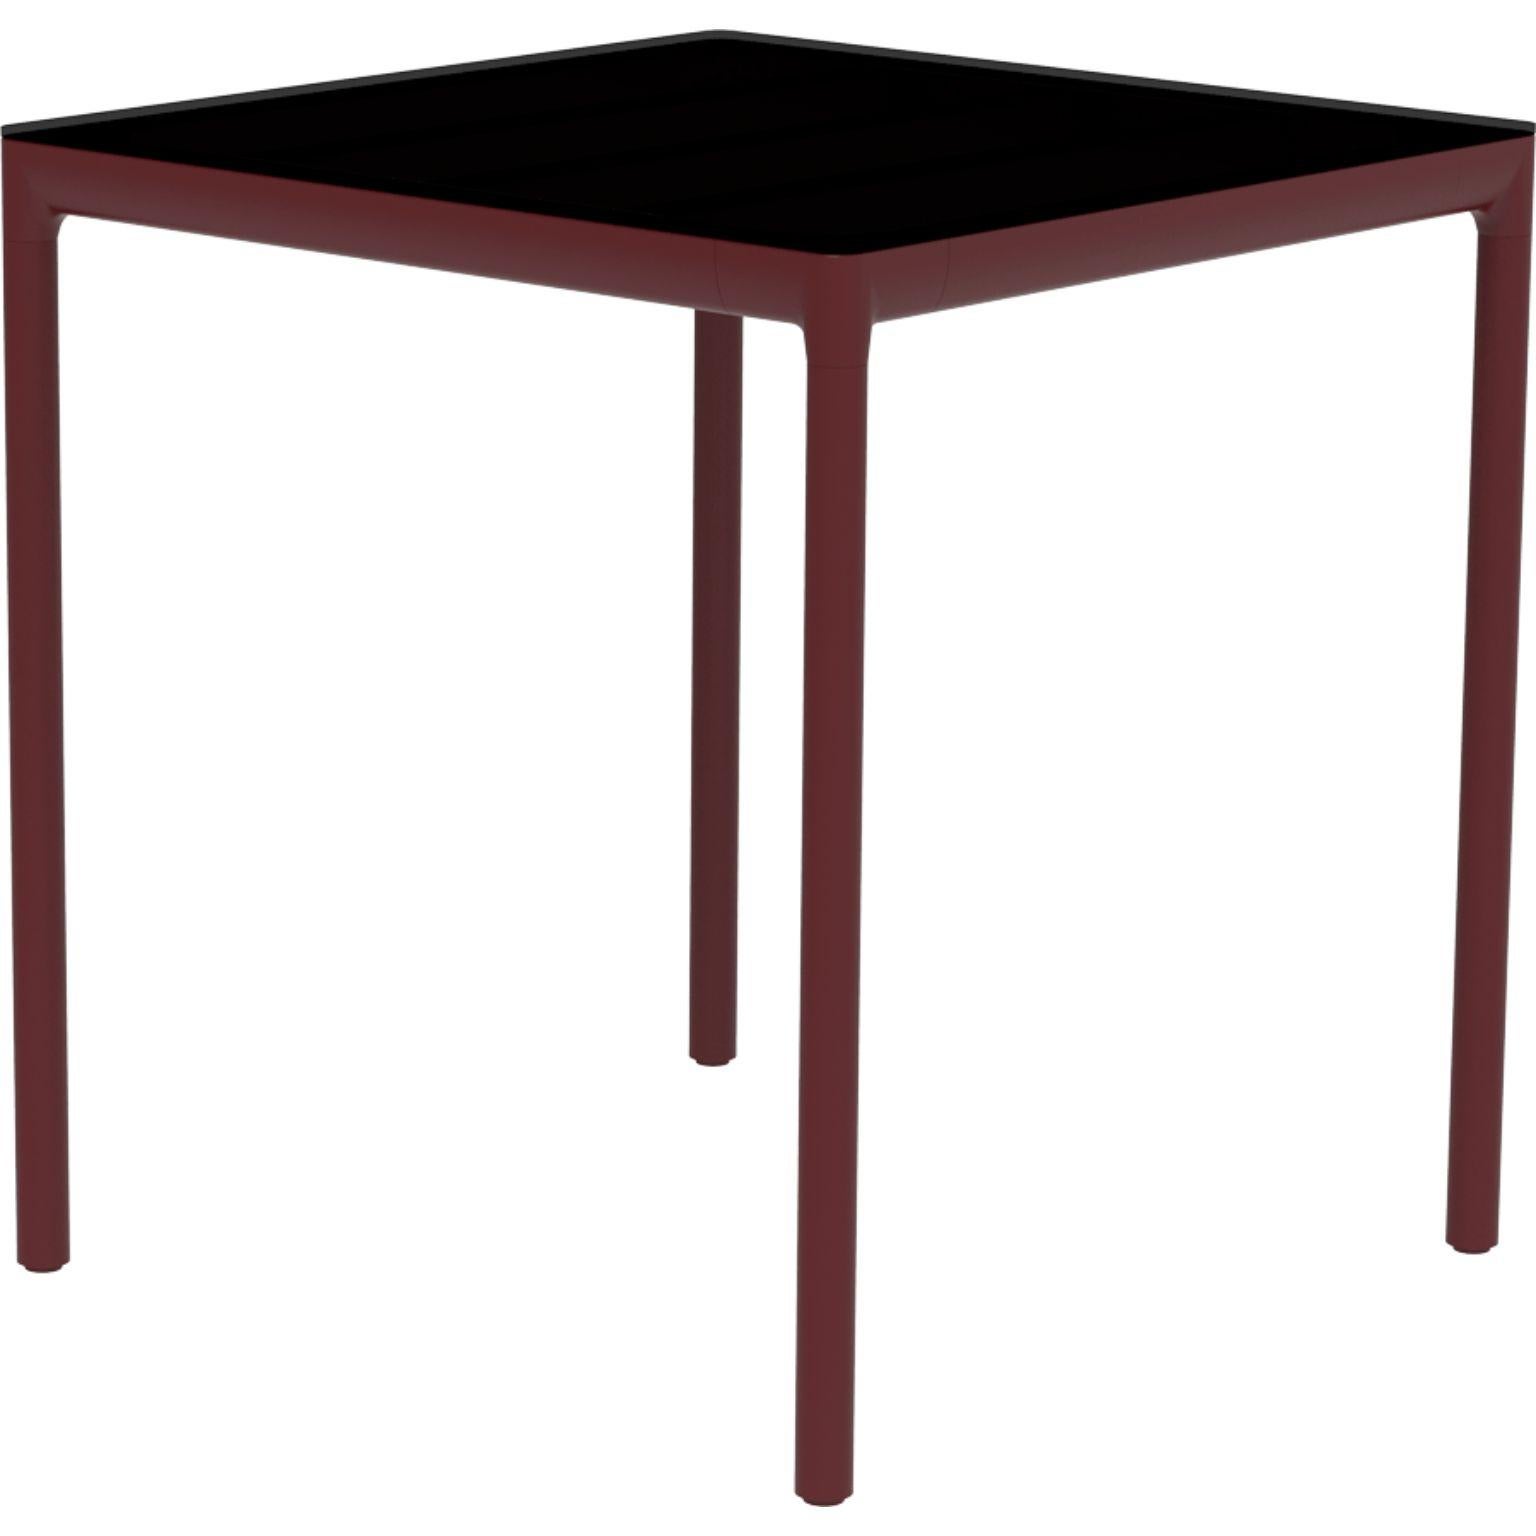 Ribbons Burgundy 70 side table by MOWEE
Dimensions: D70 x W70 x H75 cm.
Material: Aluminum, HPL top.
Weight: 12 kg.
Also available in different colors and finishes. (HPL Black Edge or Neolith top).

An unmistakable collection for its beauty